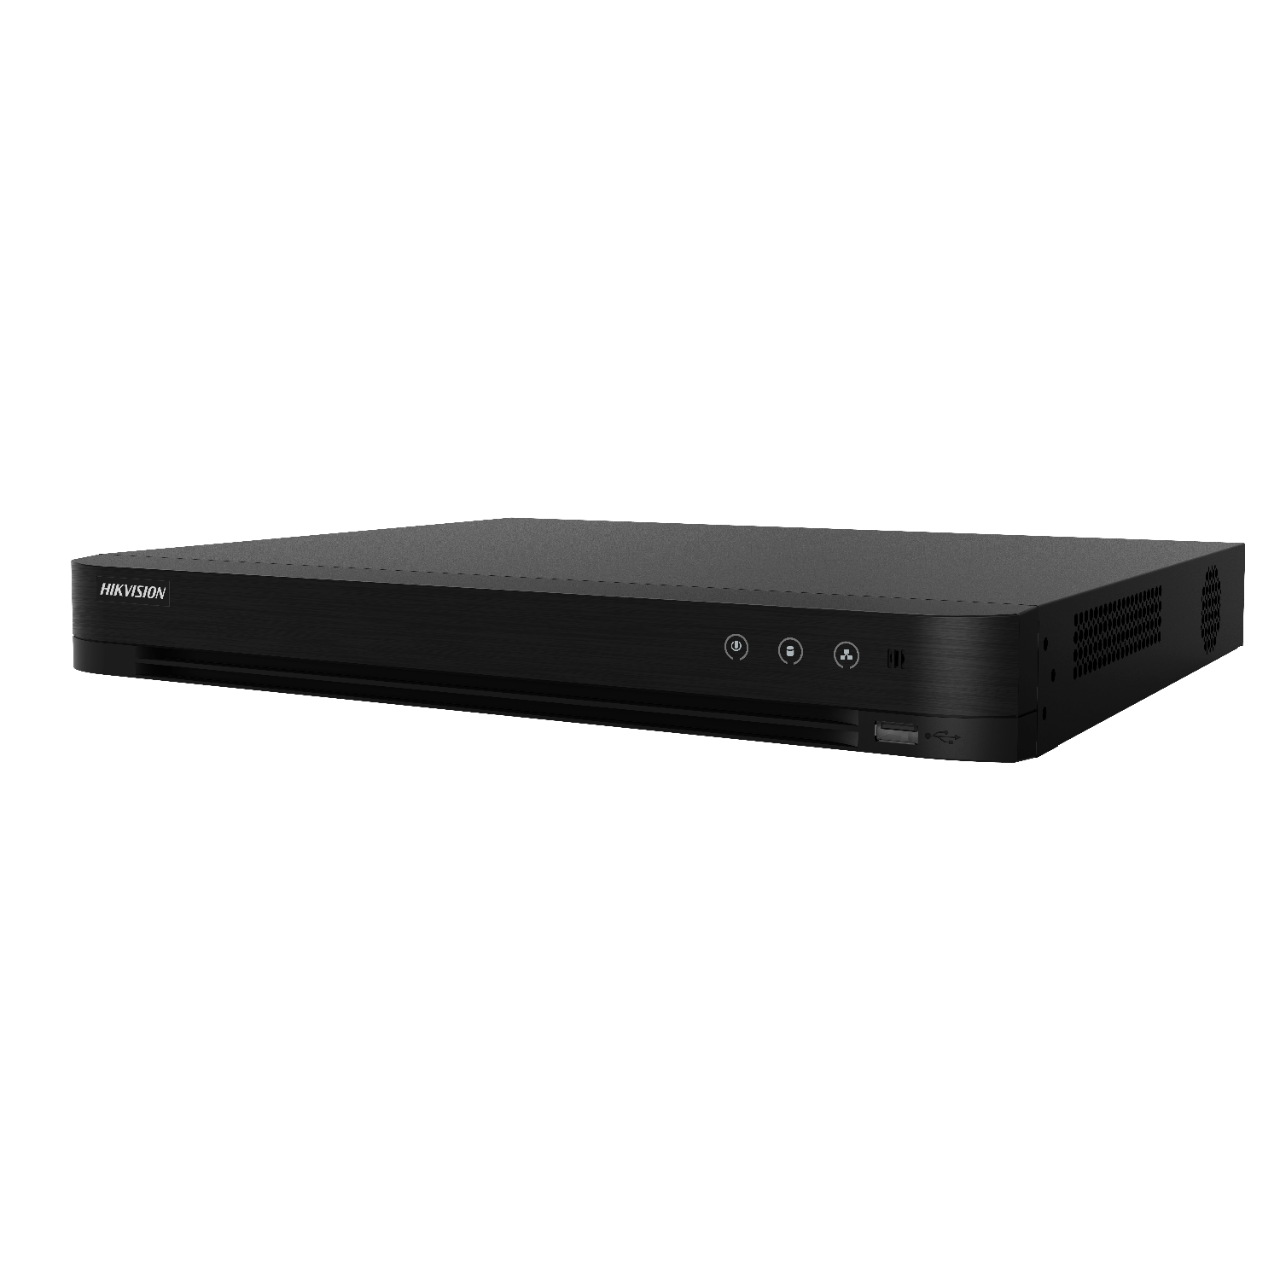 DVR AcuSense 16 ch. video 8MP, AUDIO over coaxial - HIKVISION iDS-7216HUHI-M2-S